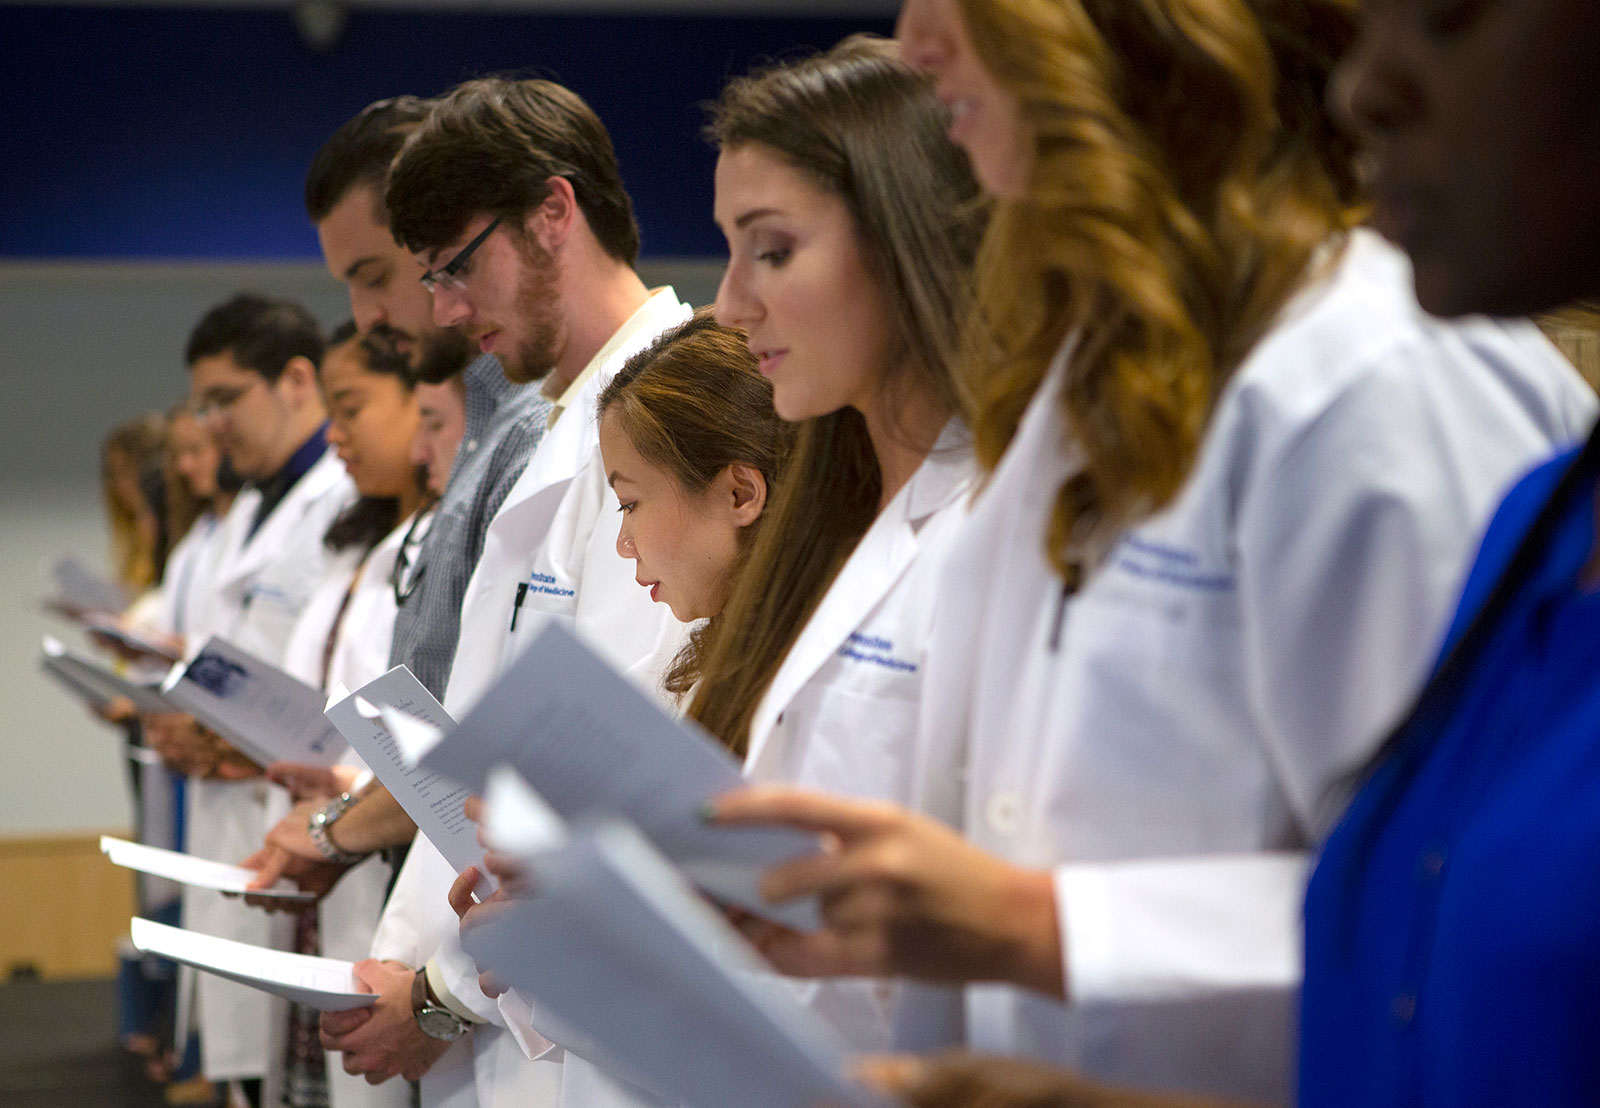 Participants on stage recite the Graduate Student Oath during the Penn State College of Medicine Graduate Oath Ceremony in August 2018. A line of students is pictured holding a paper with the oath printed on it. The students are looking down and reading from the paper.